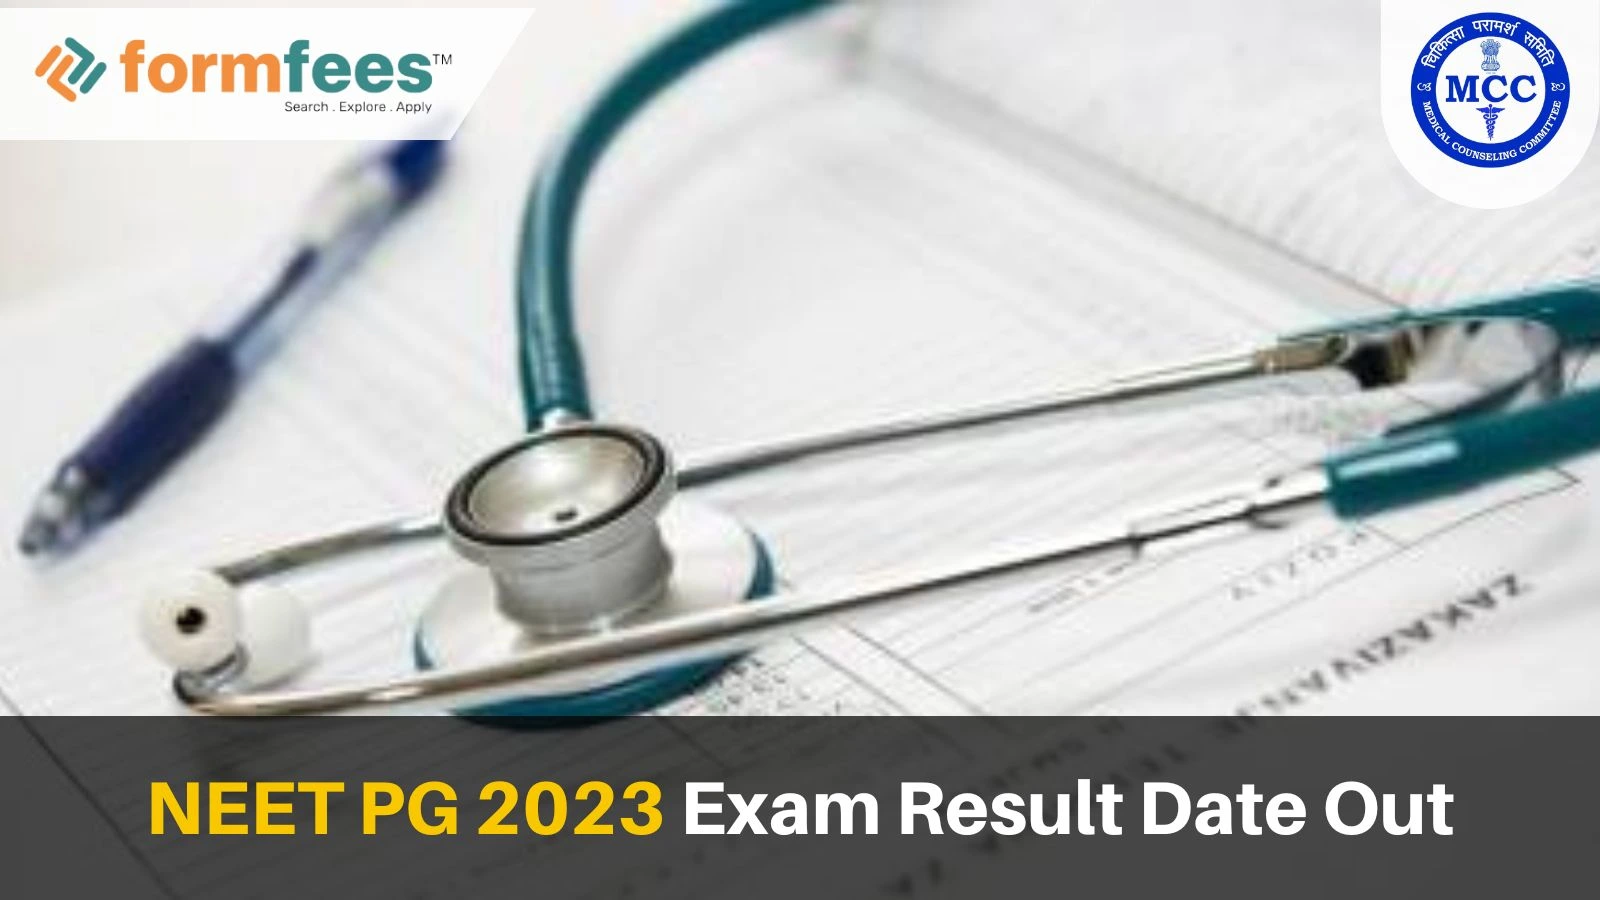 NEET PG 2023 Exam, Result Date Out